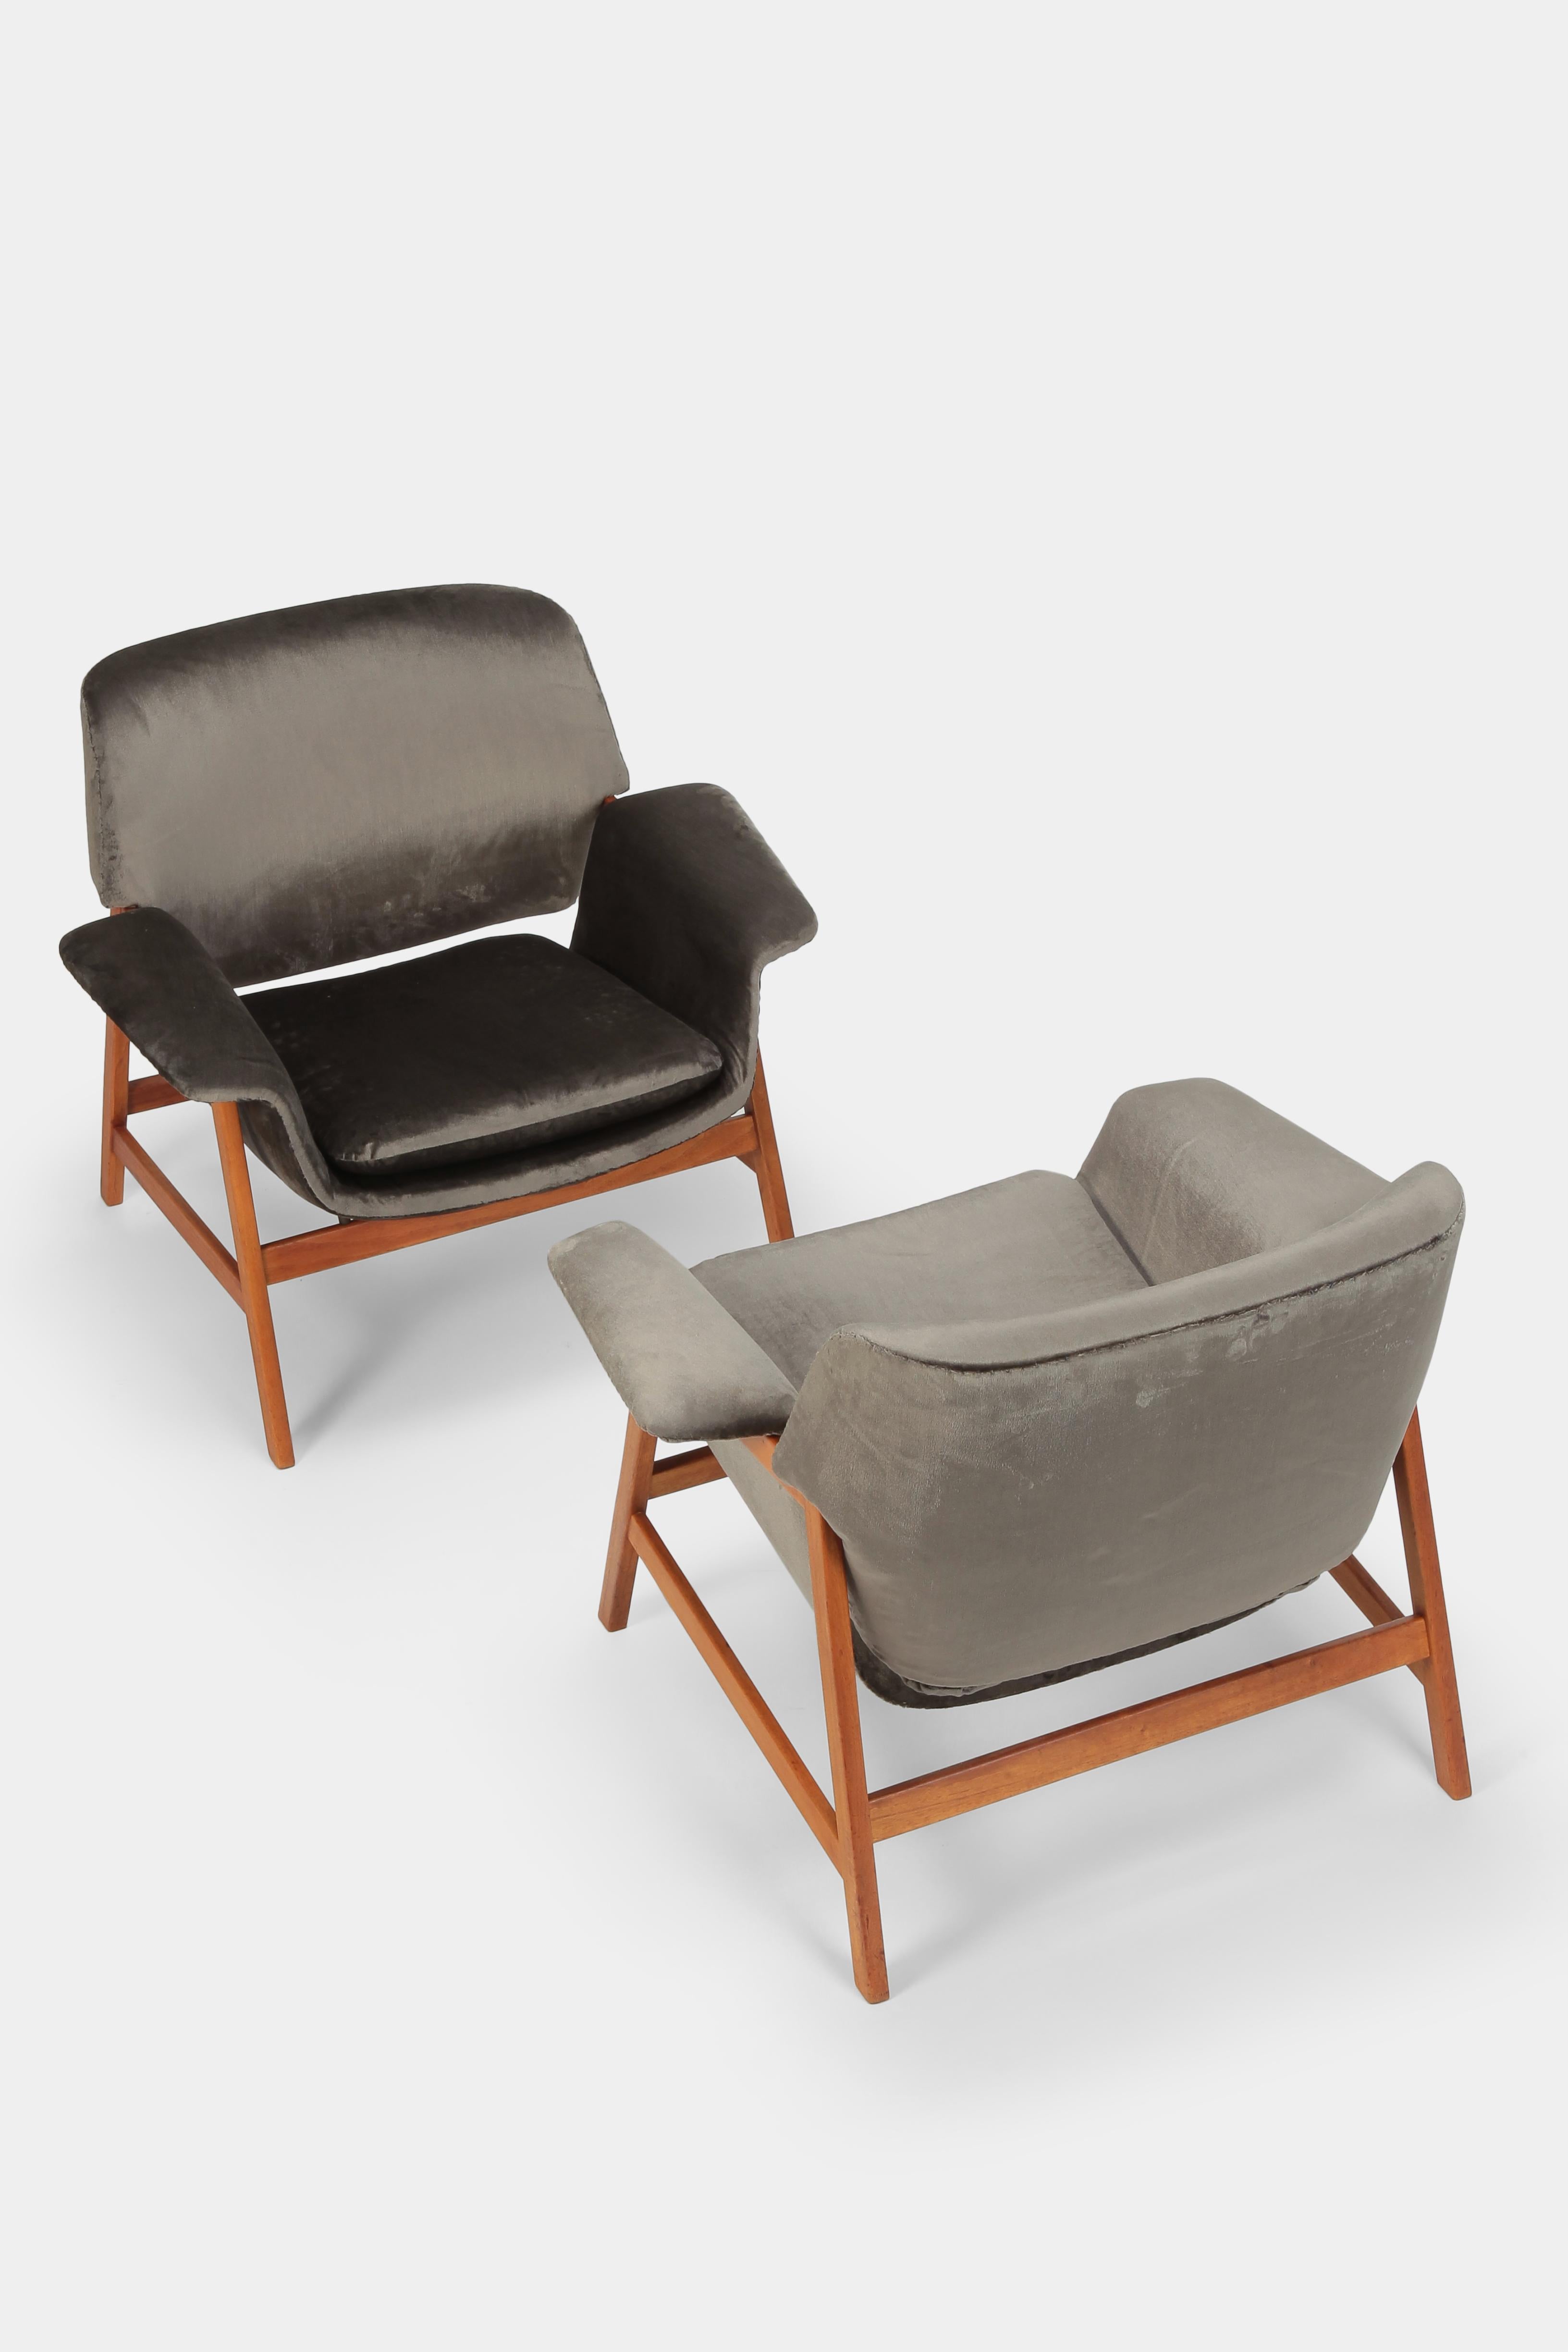 Pair of 849 chairs designed by Gianfranco Frattini for Cassina in 1956. Winner of the coveted design award Compasso d'Oro in 1956. Newly covered with luxurious, warm silk velours. The lightweight Walnut frames have been freshly oiled, restored and